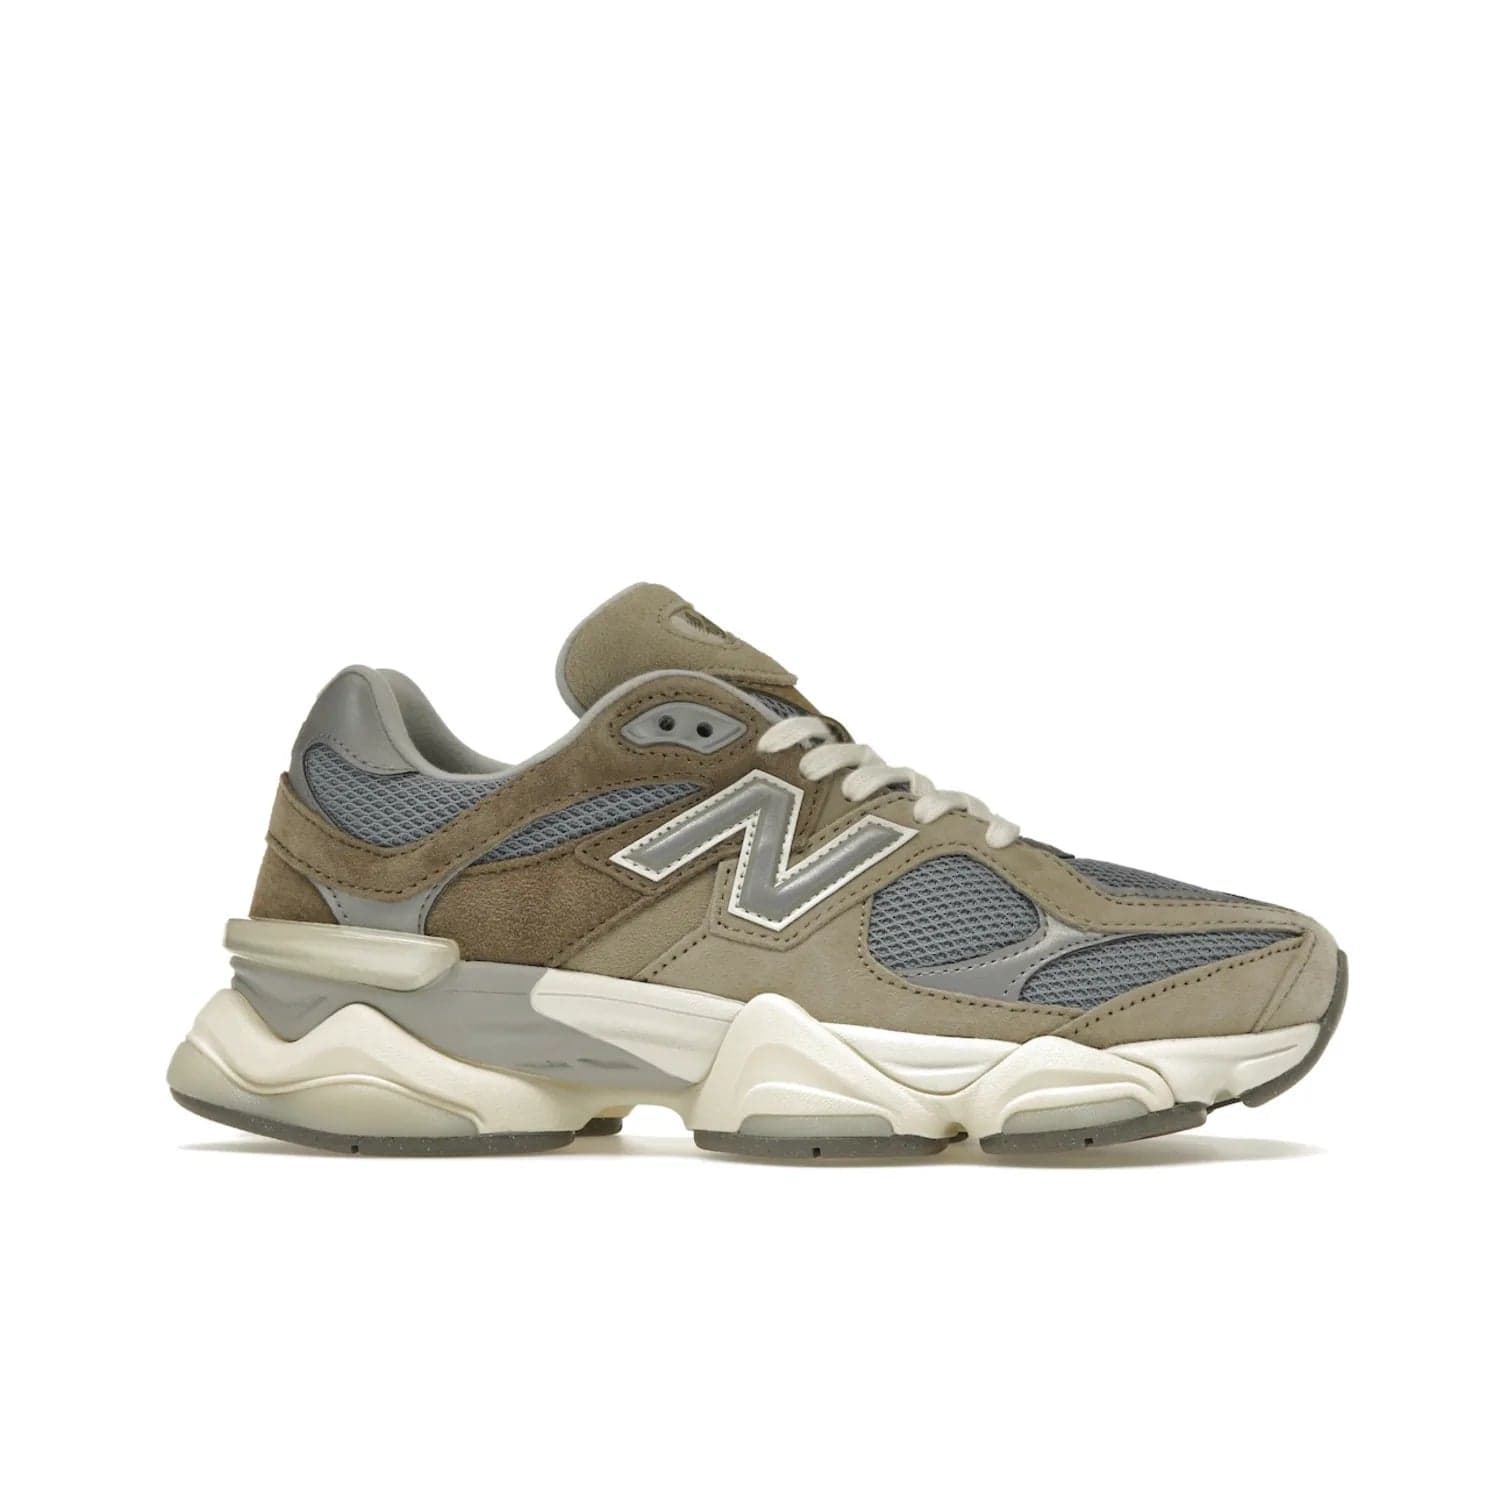 New Balance 9060 Mushroom - Image 2 - Only at www.BallersClubKickz.com - Get the New Balance 9060 Mushroom in stylish aluminum and mushroom tones. Featuring a porous mesh fabric with multiple suede overlays, a grey N symbol and rugged off-white/grey sole. Shop now and make a statement.